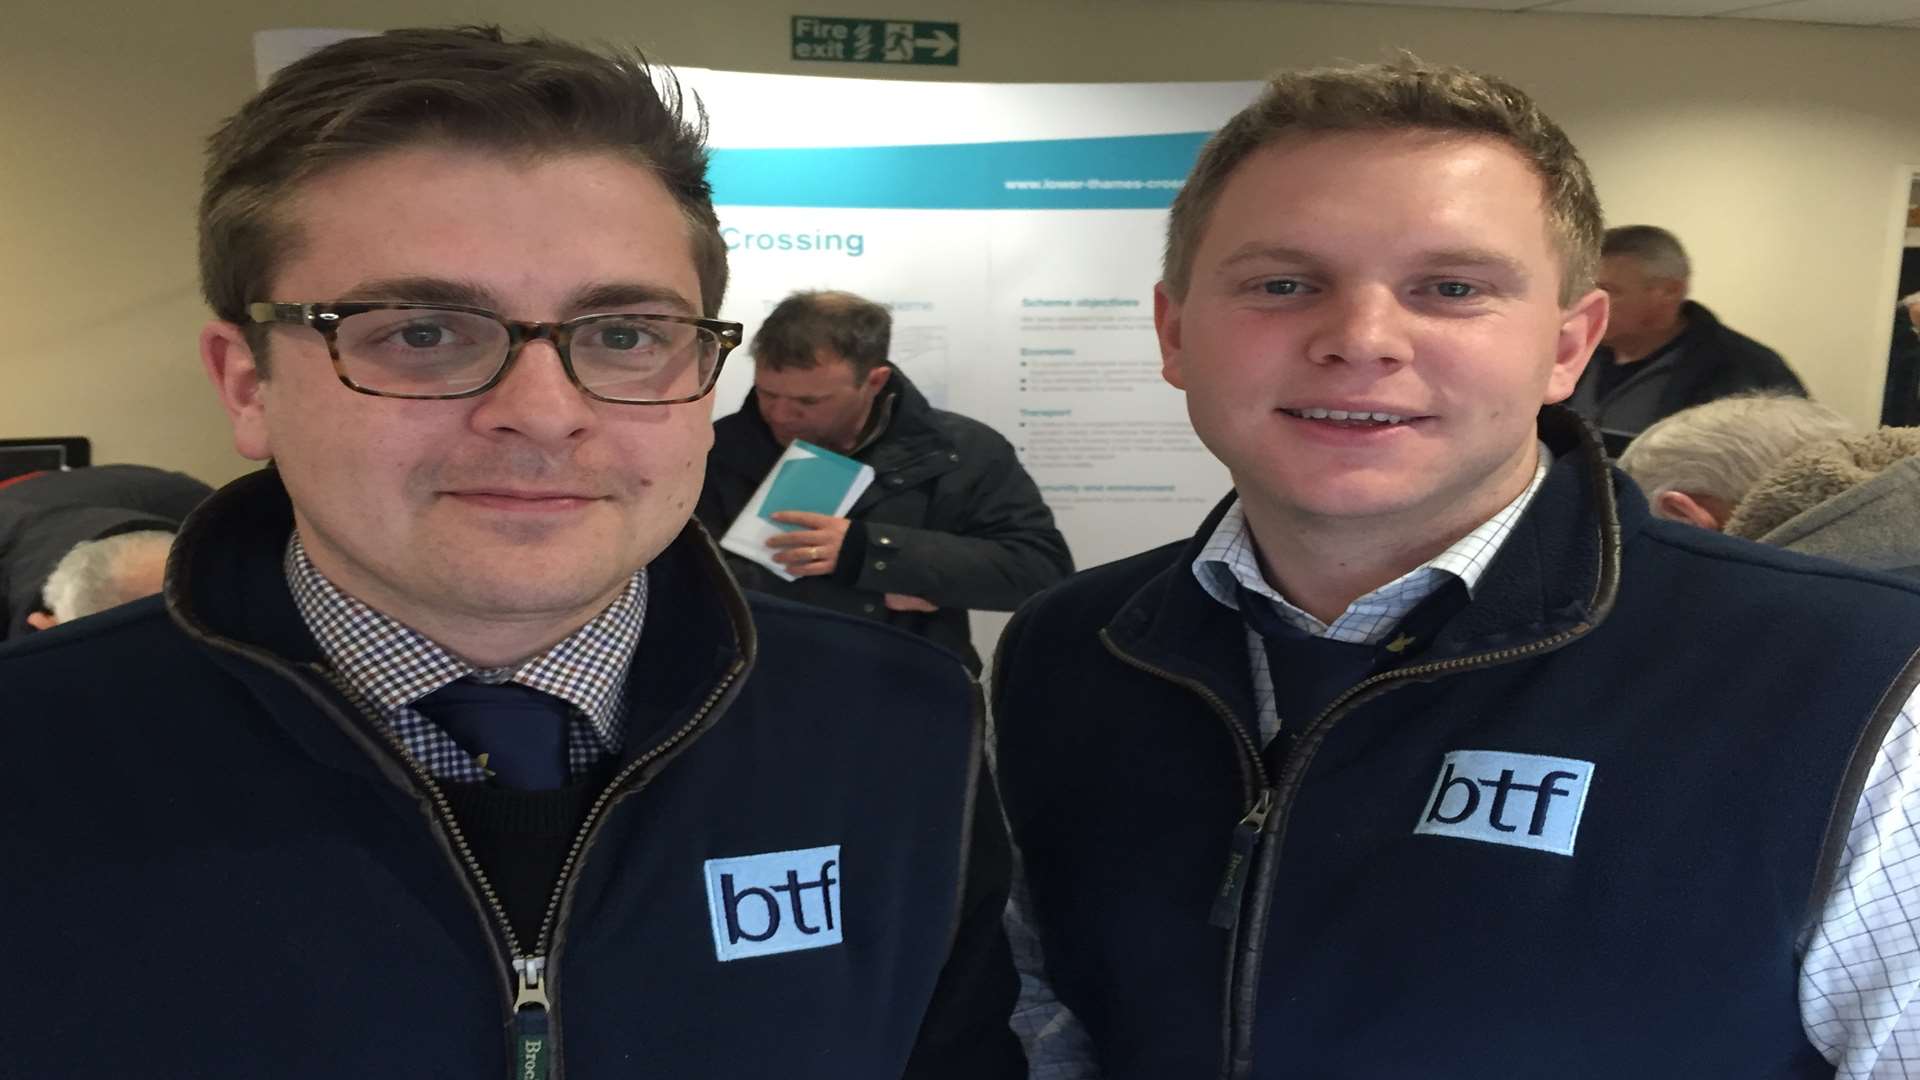 Ed Plumptre and Harry Kenton, both 26, went to the consultation exhibition at Cascades Leisure Centre.